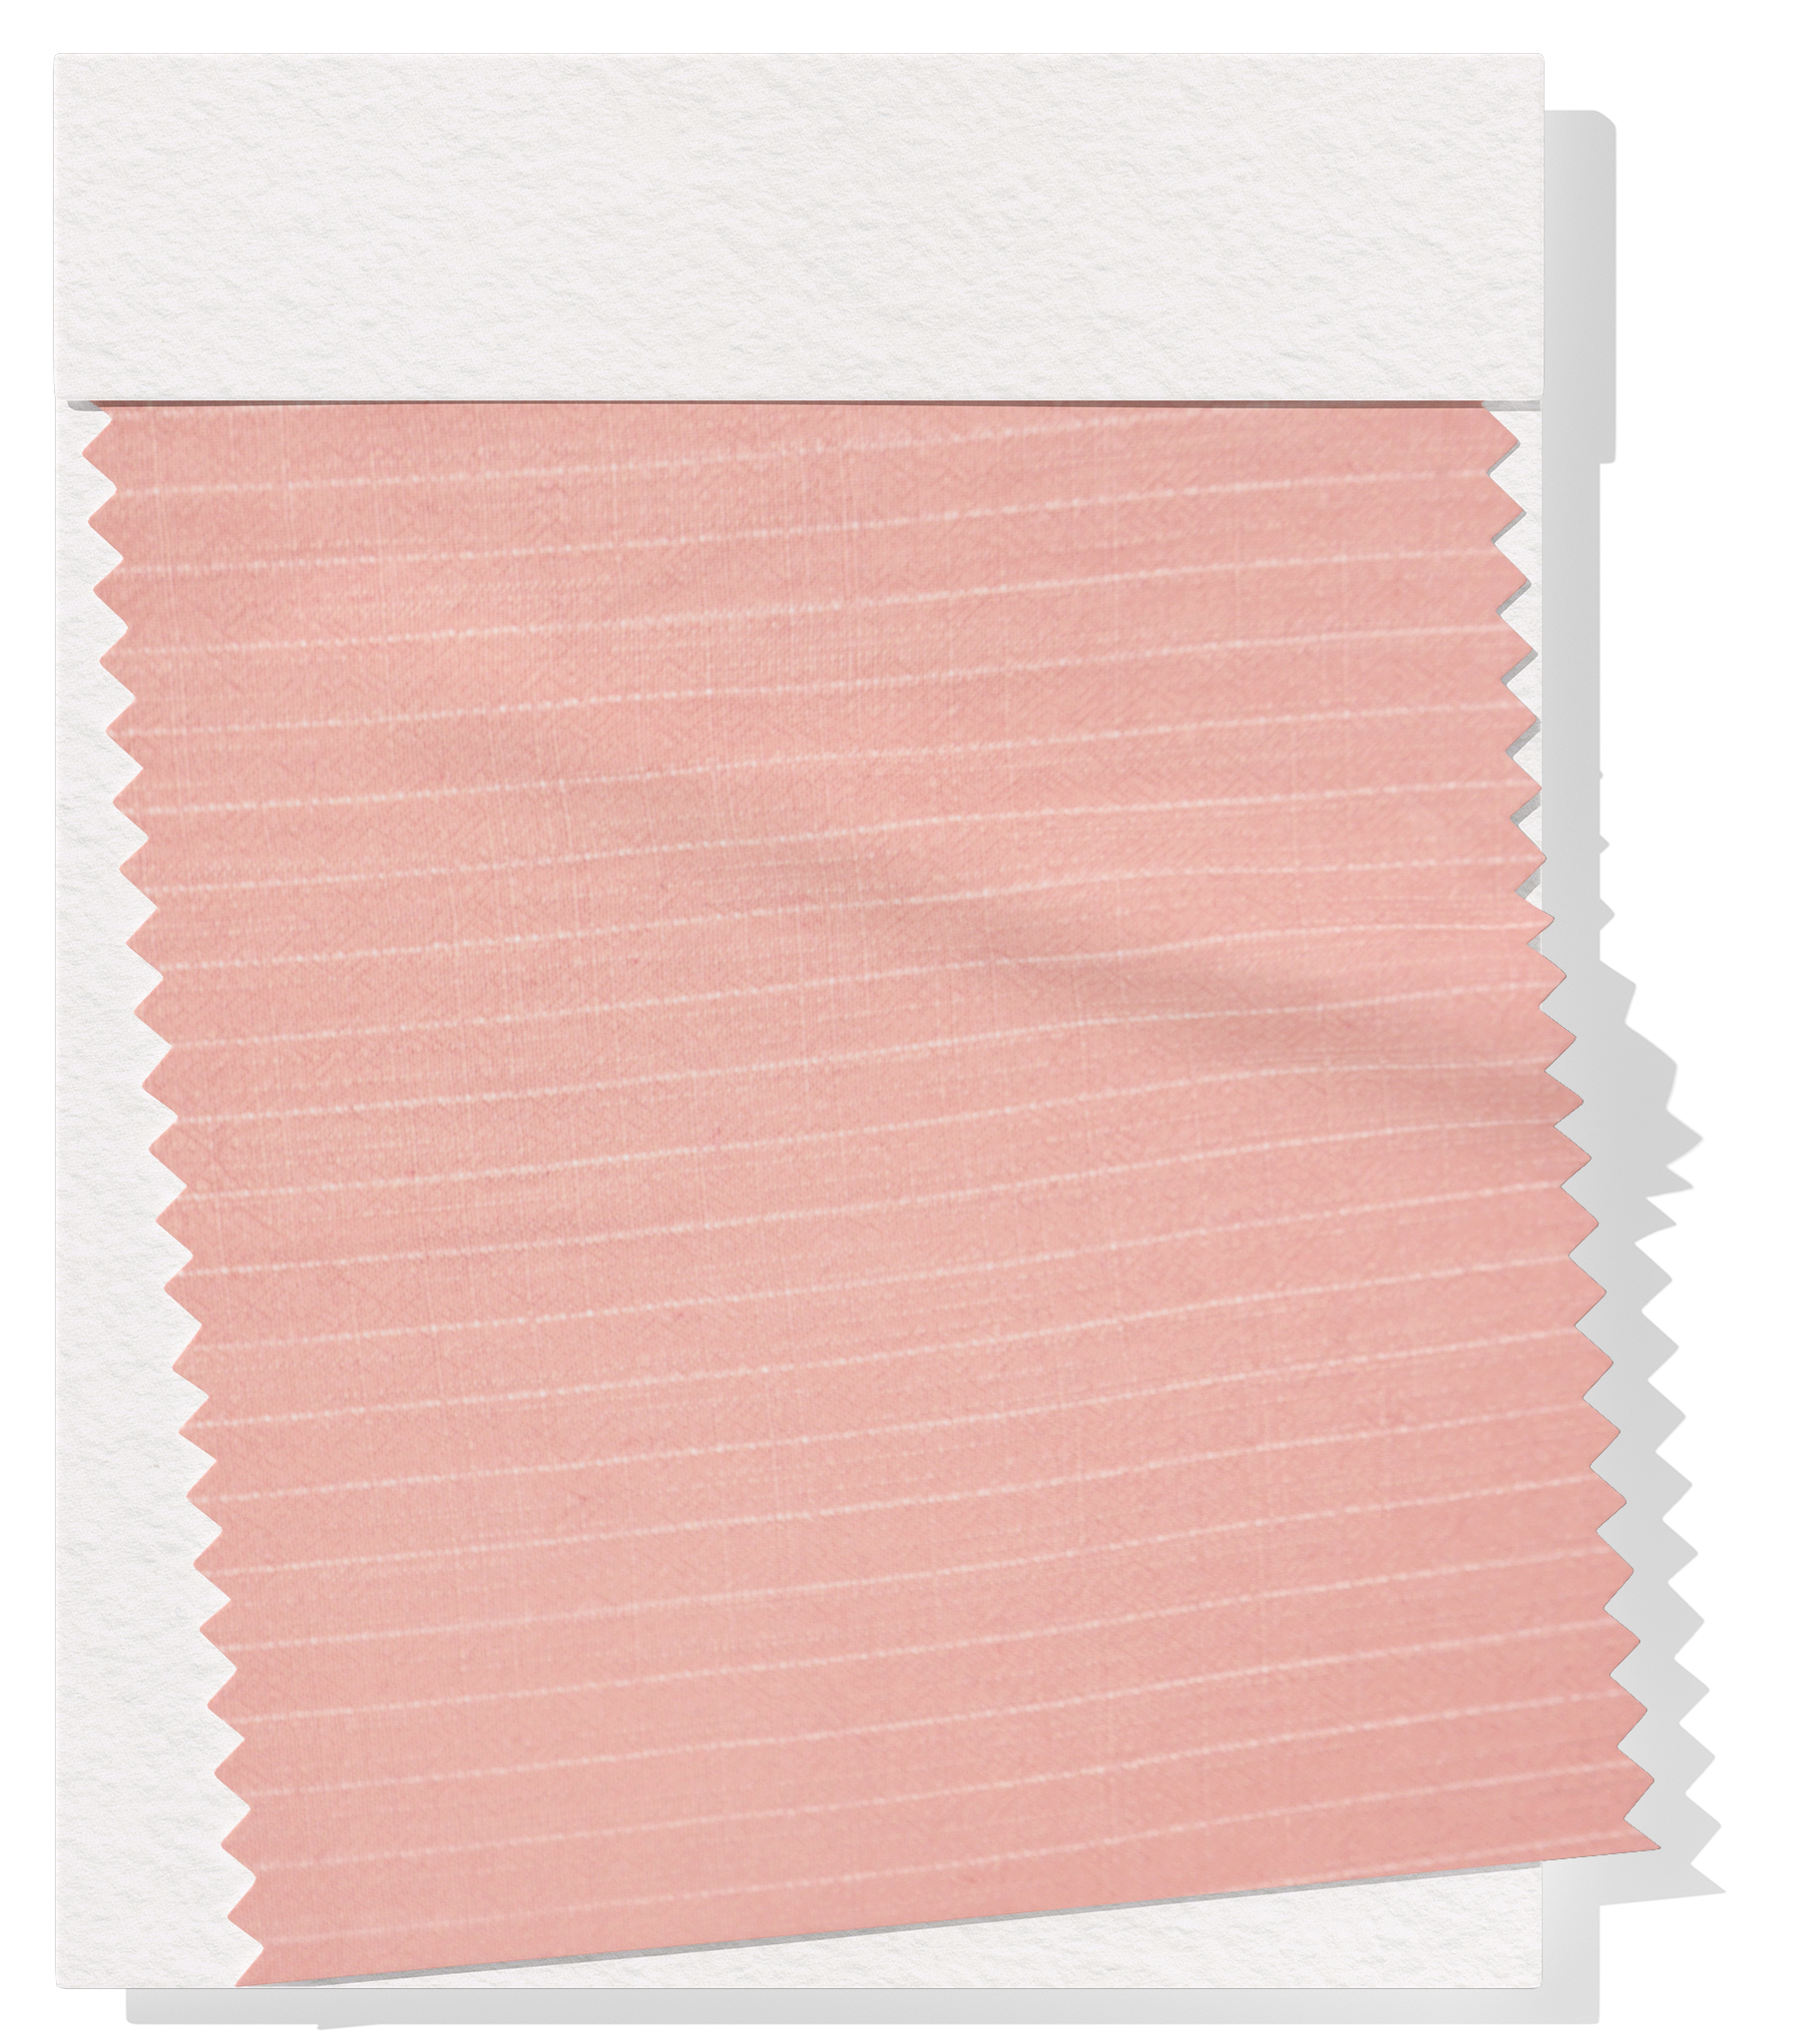 Striped Linen / Ramie $18.00p/m - Pink with White Stripes